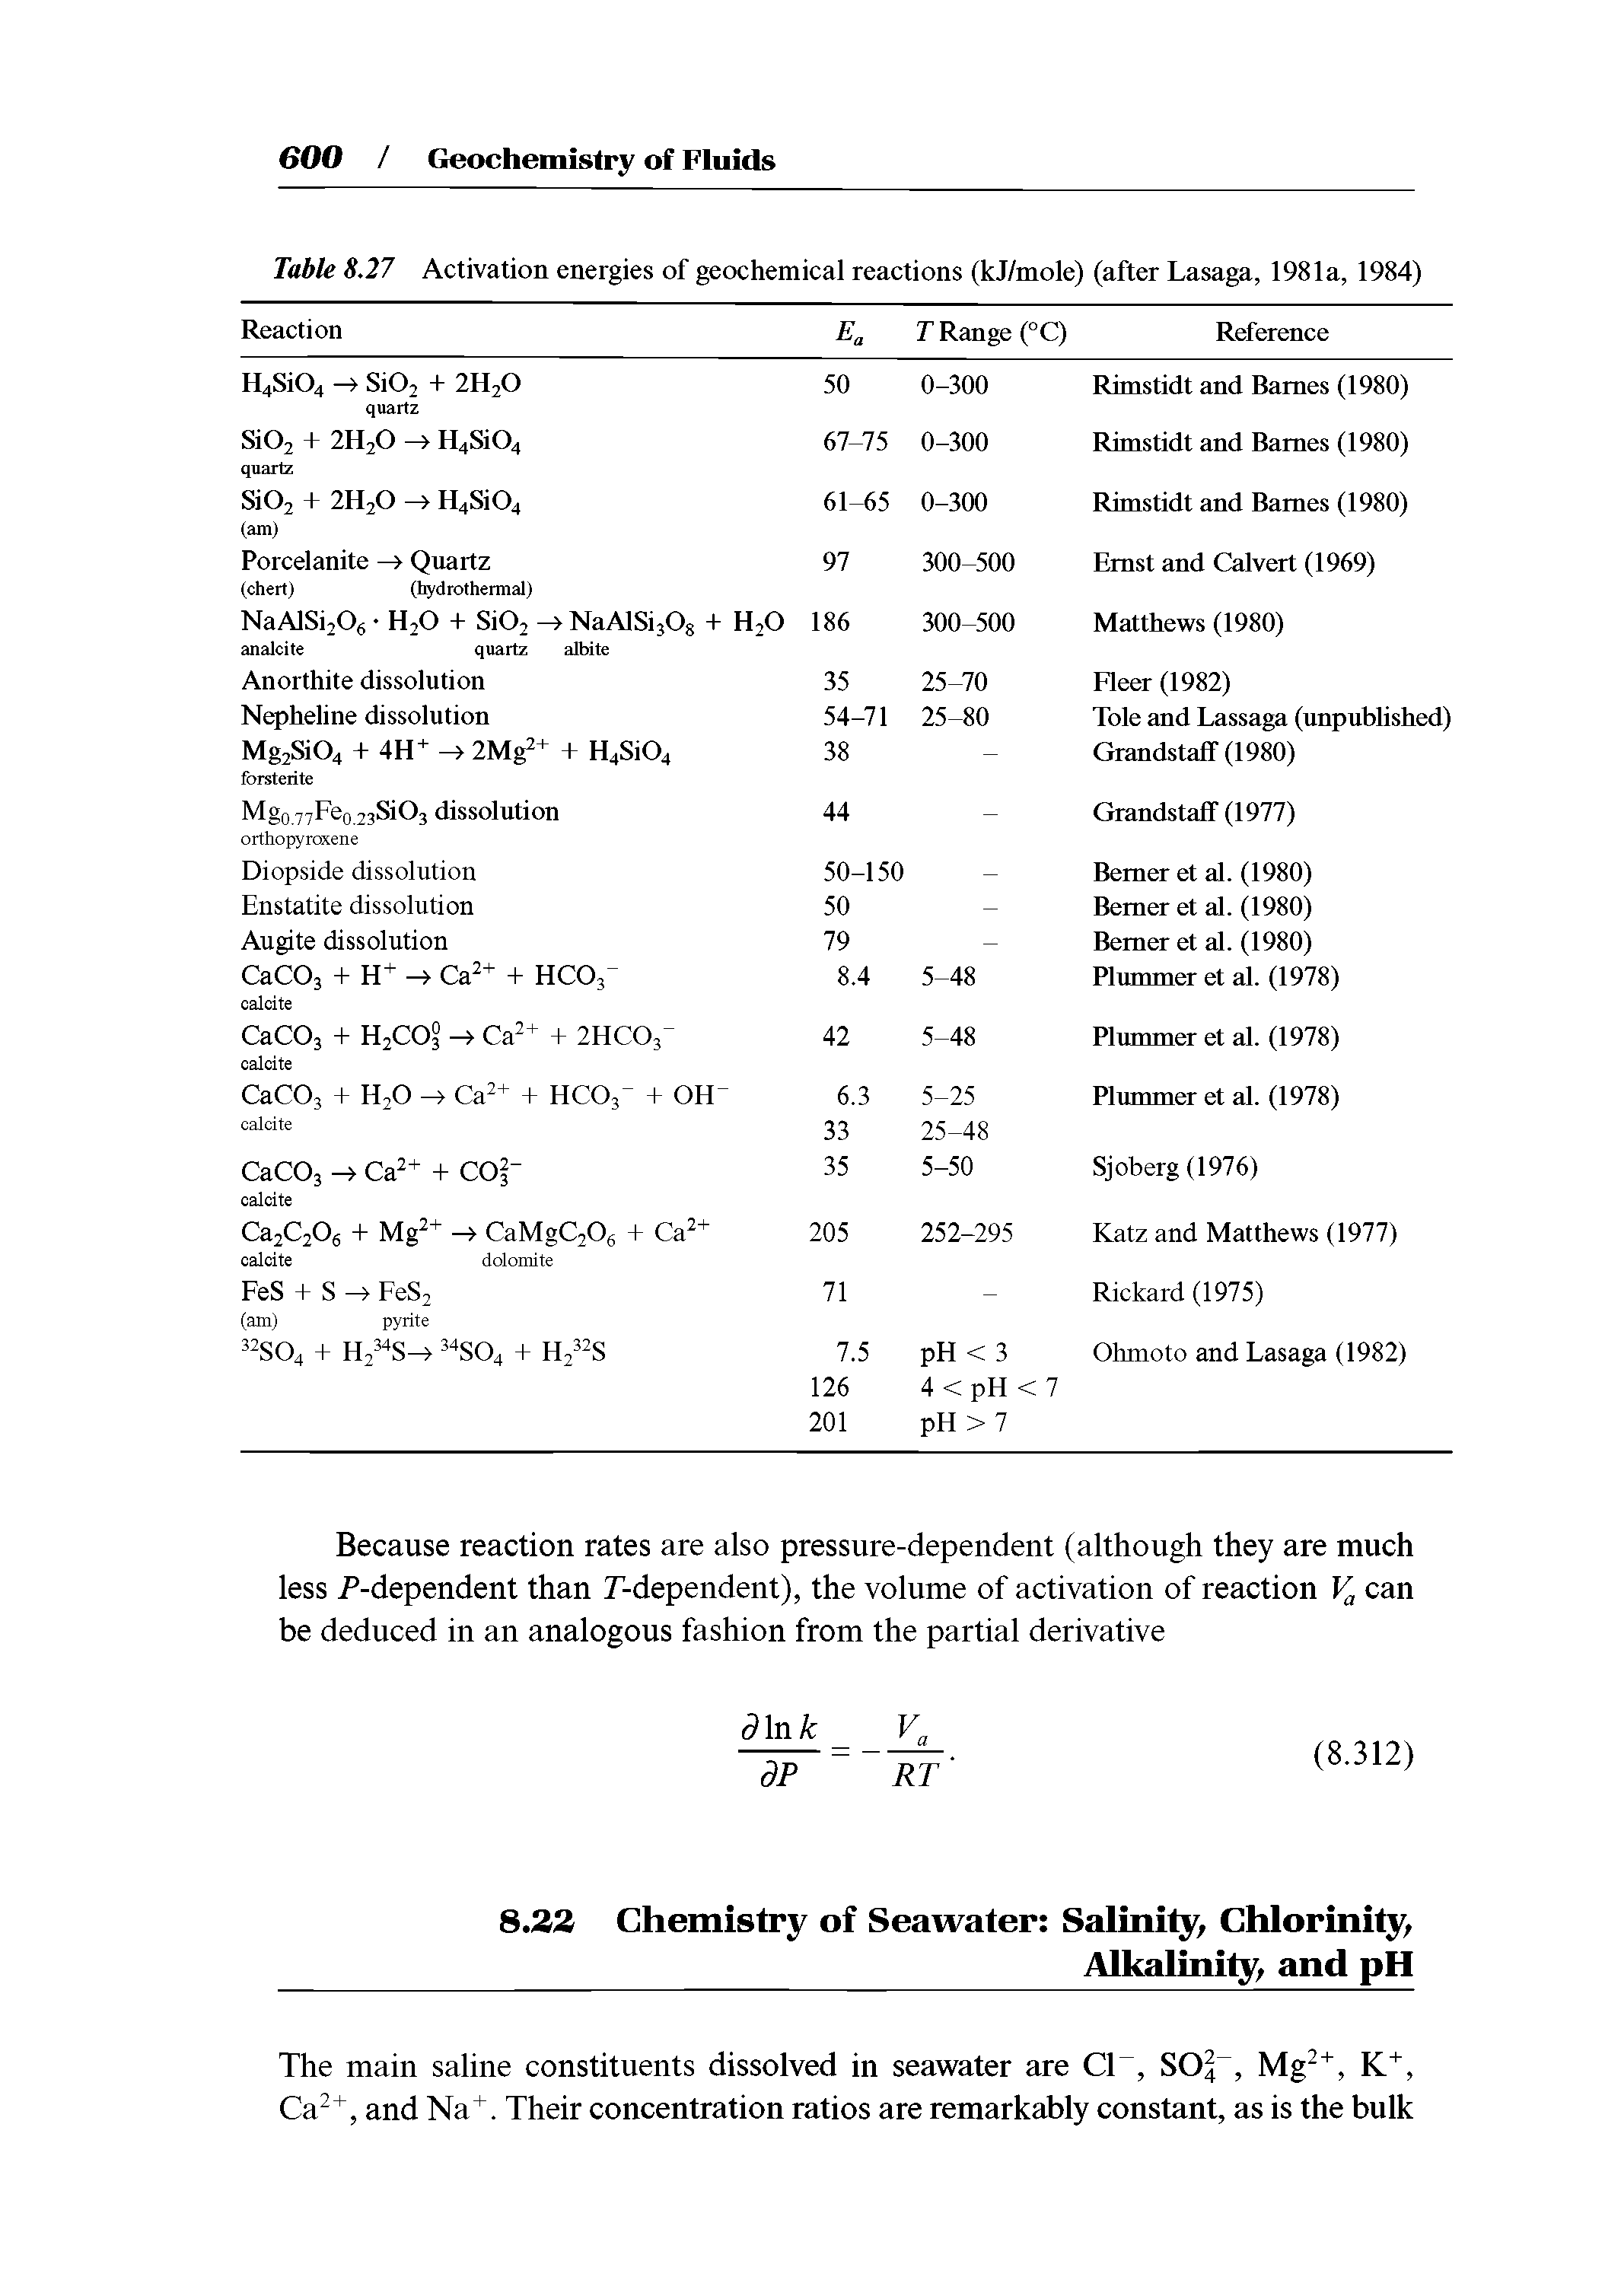 Table 8.27 Activation energies of geochemical reactions (kJ/mole) (after Lasaga, 1981a, 1984)...